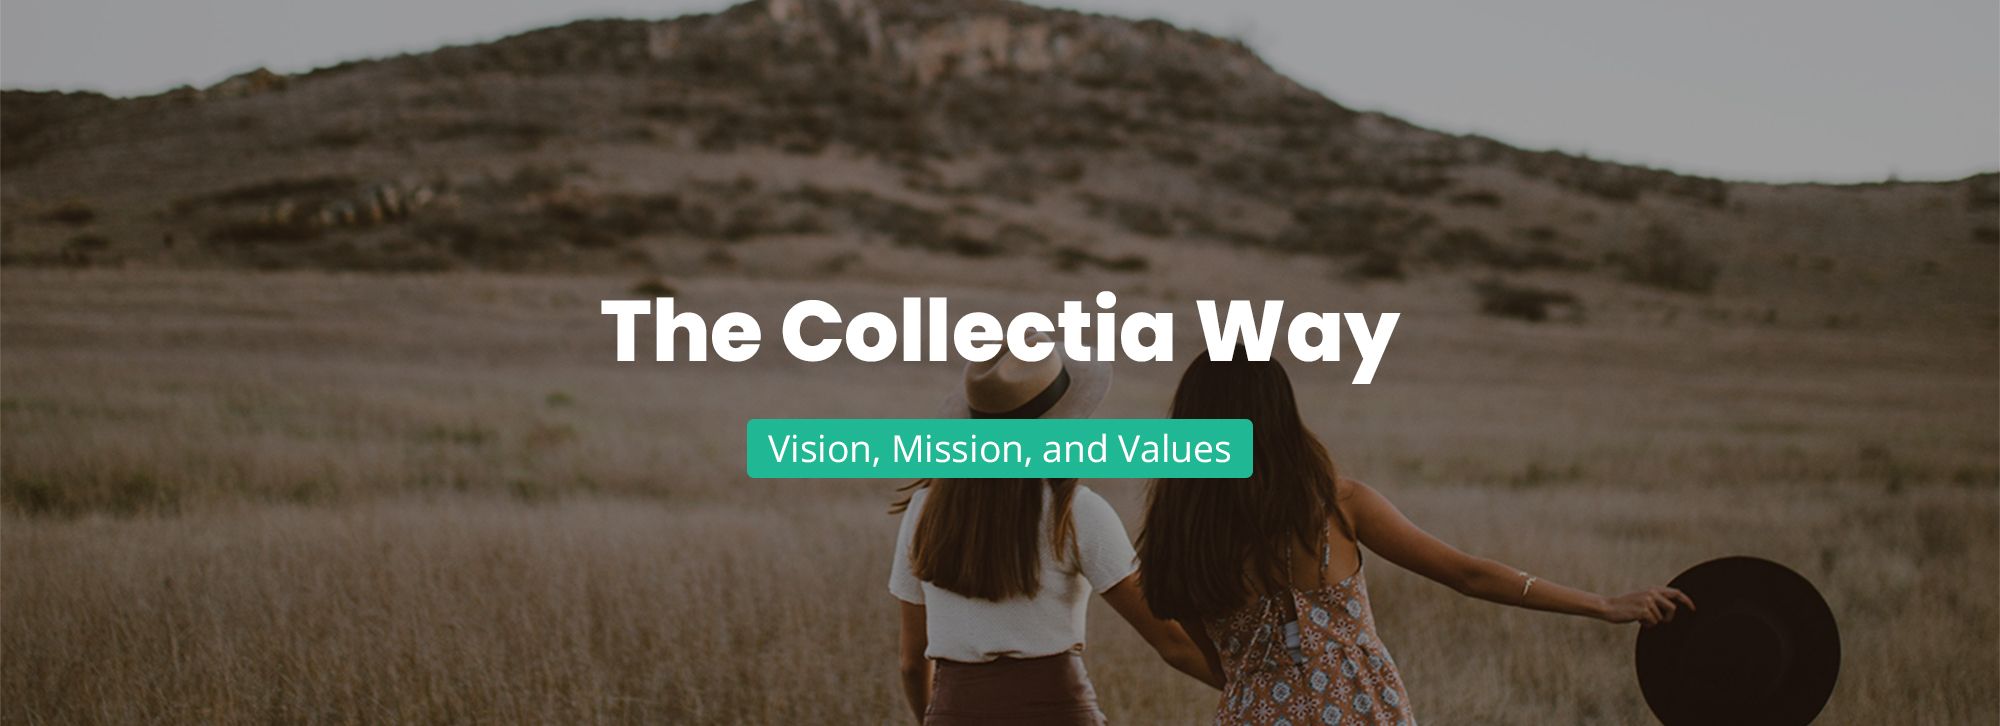 Redefining our corporate purpose - Vision Mission and Values - Collectia Group